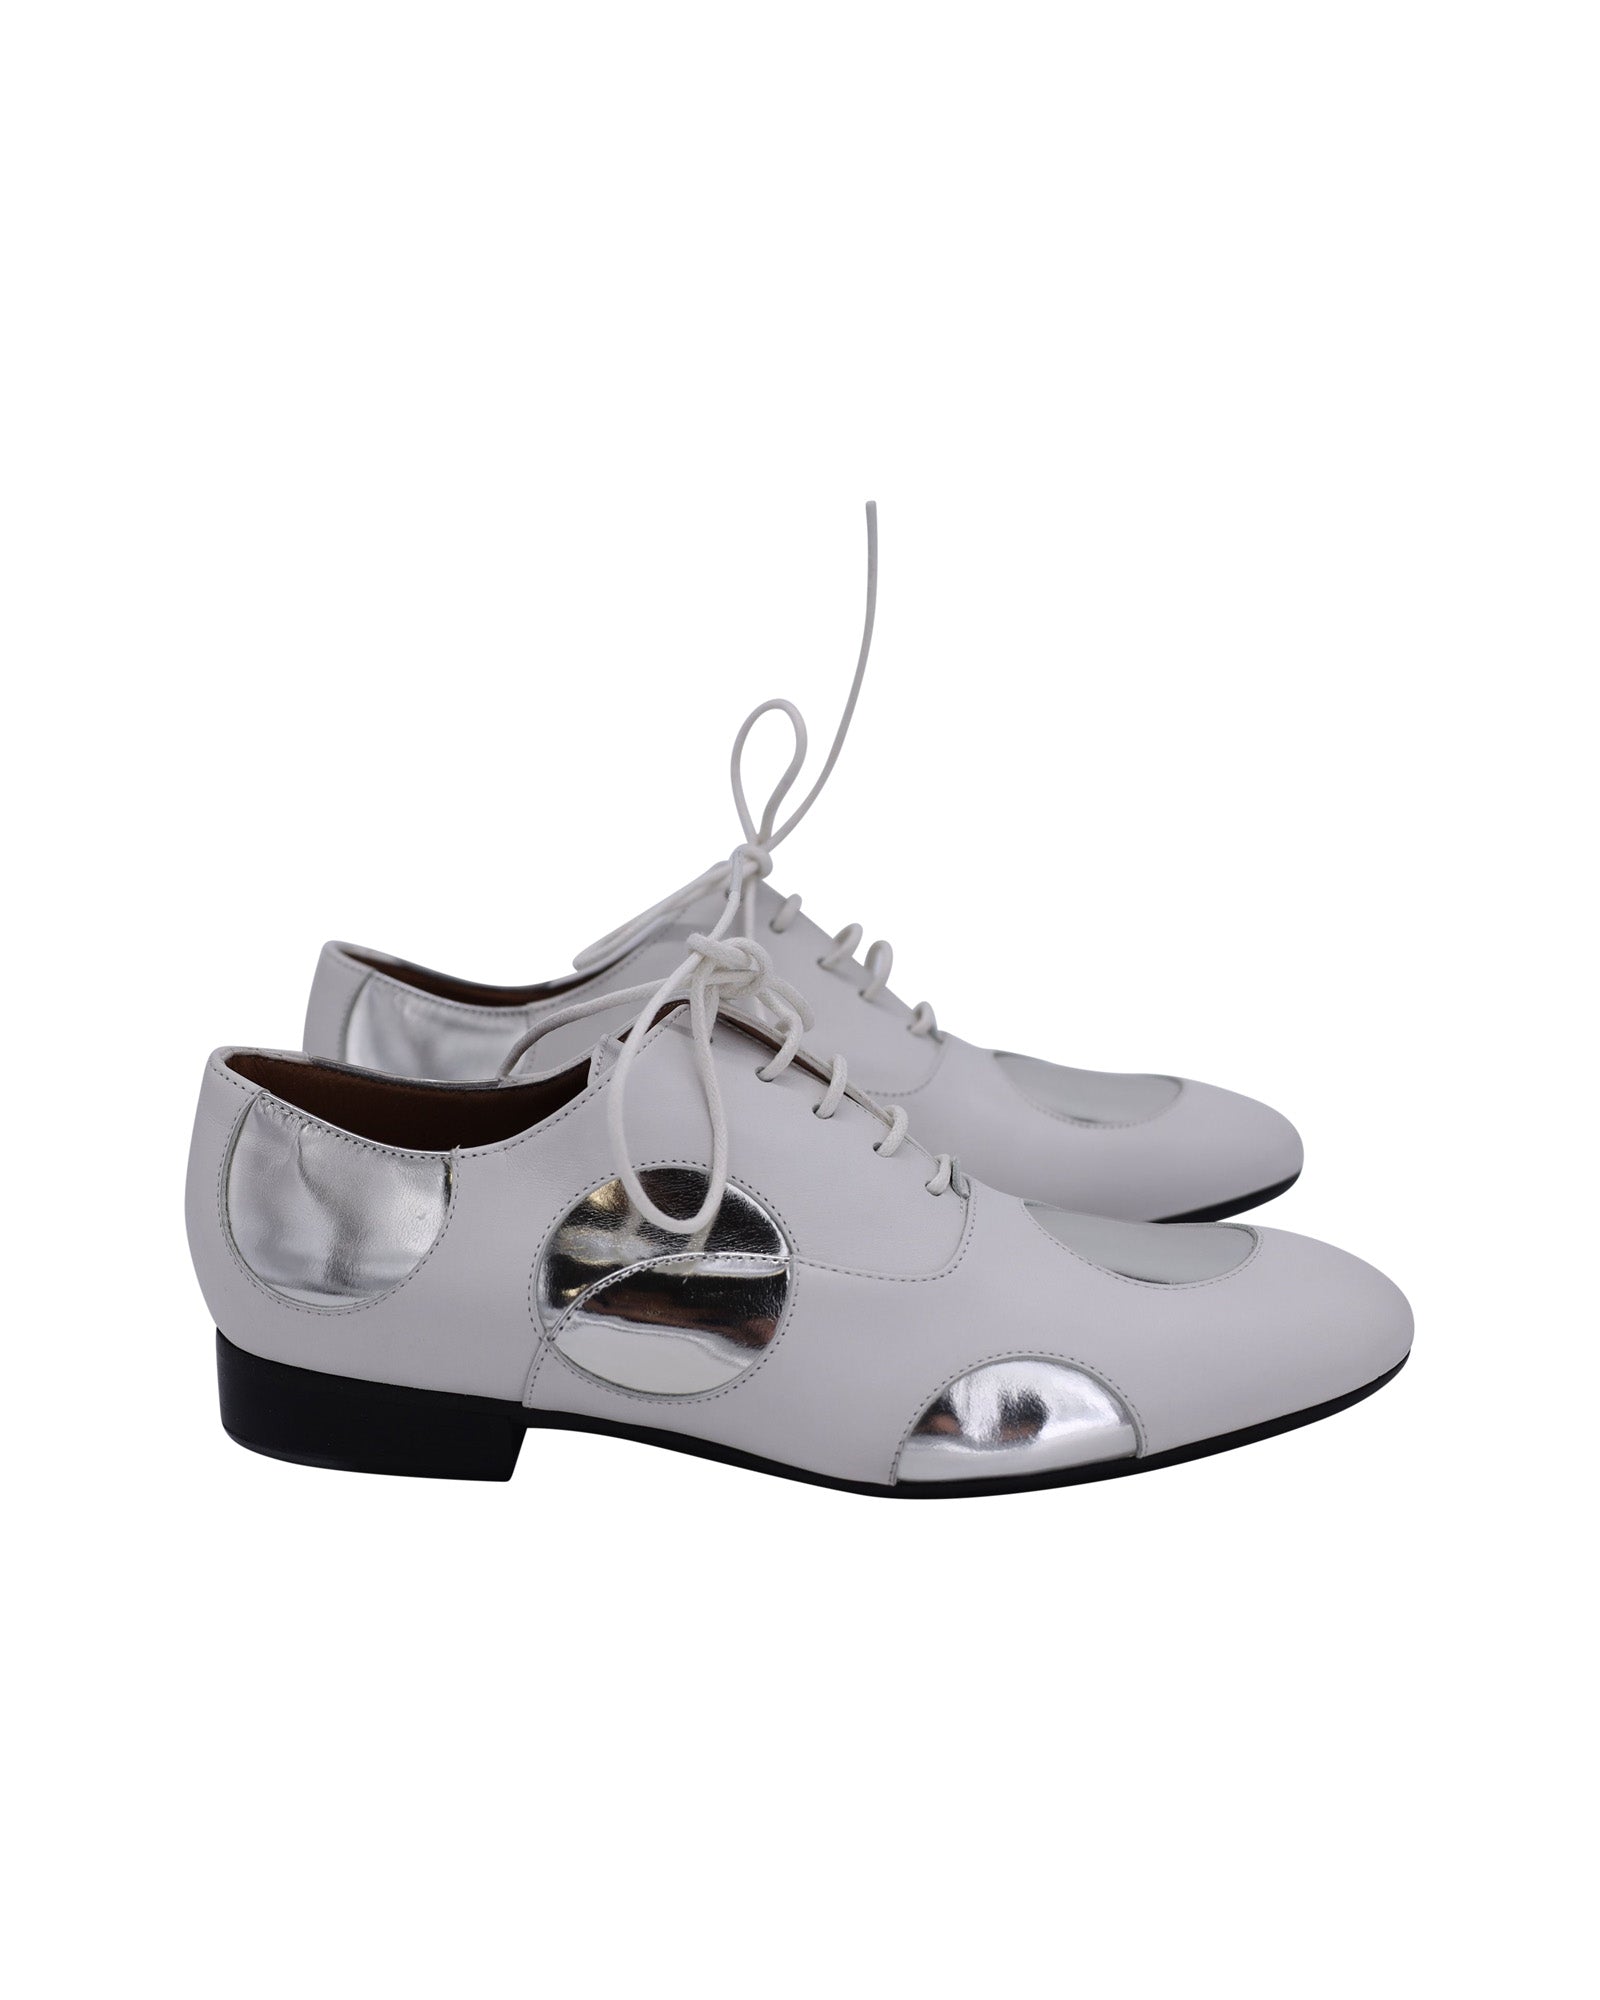 Shop Marni Polka Dot Lace Up Oxfords In White And Silver Leather